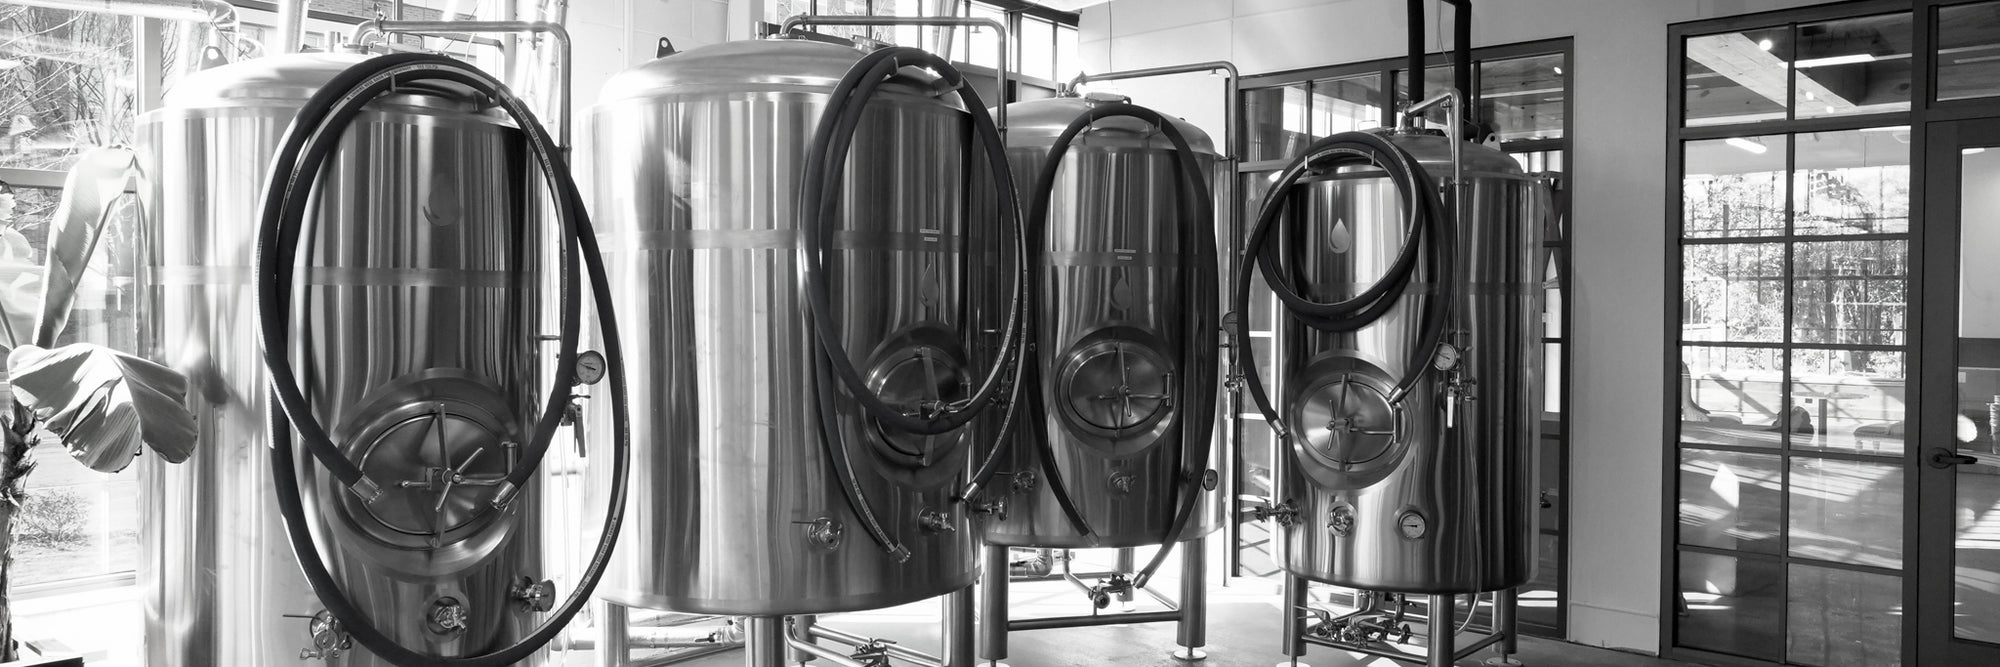 Elevate your brewing or distilling setup with versatile brewers hose options from Deutsche Beverage Parts. Explore various lengths and ratings tailored for sanitary applications including brewing, food transfer, and distilling."